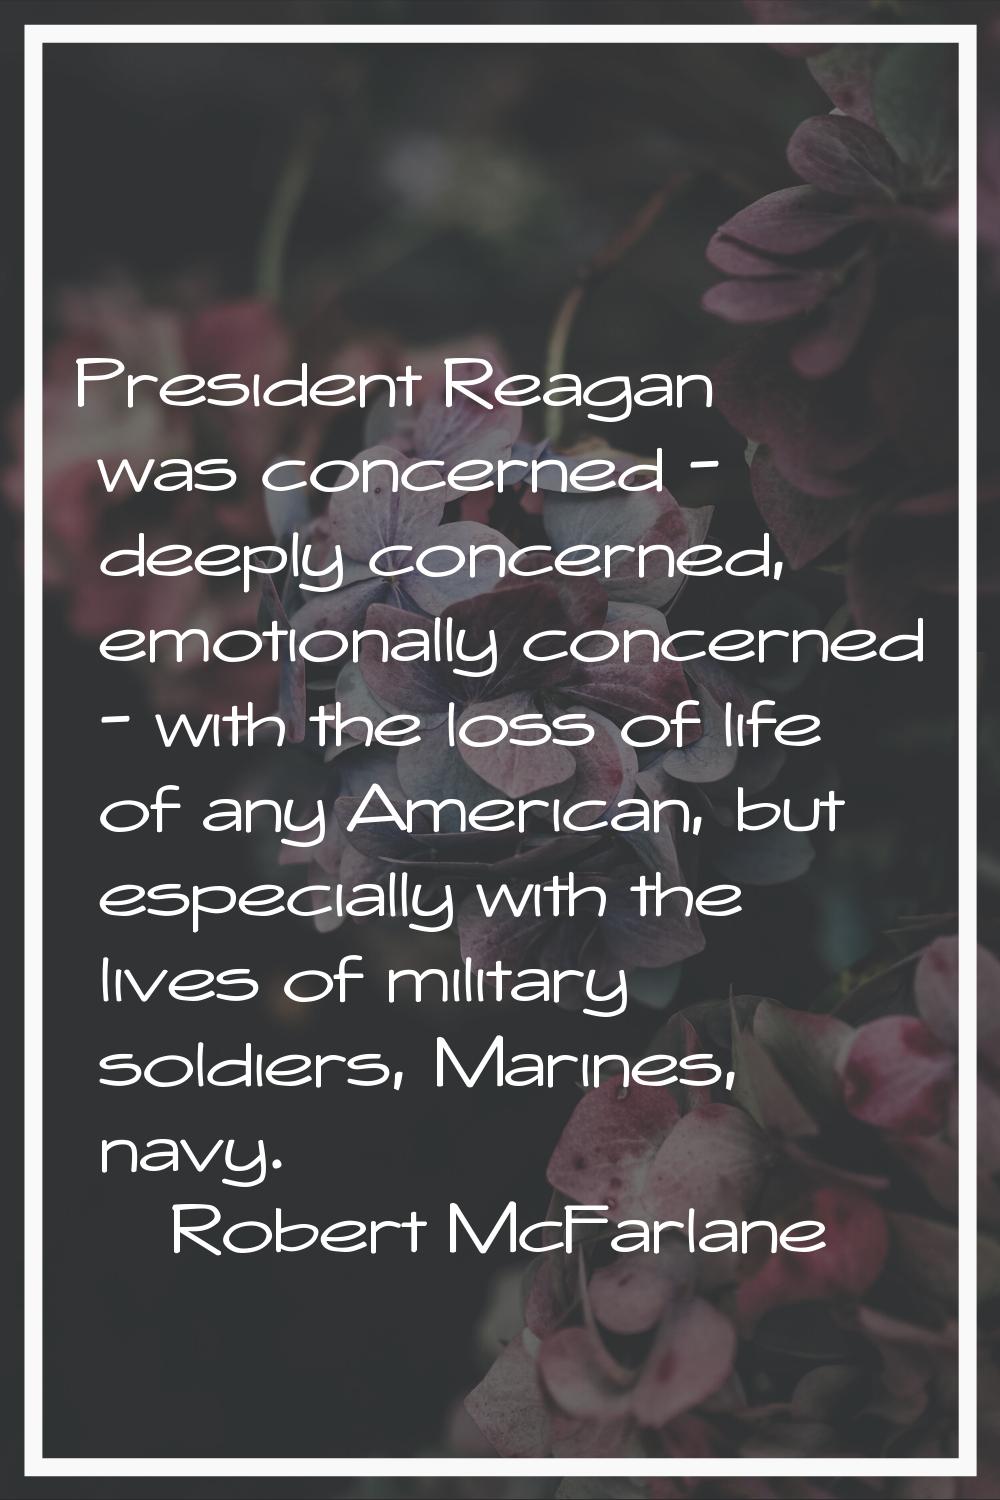 President Reagan was concerned - deeply concerned, emotionally concerned - with the loss of life of